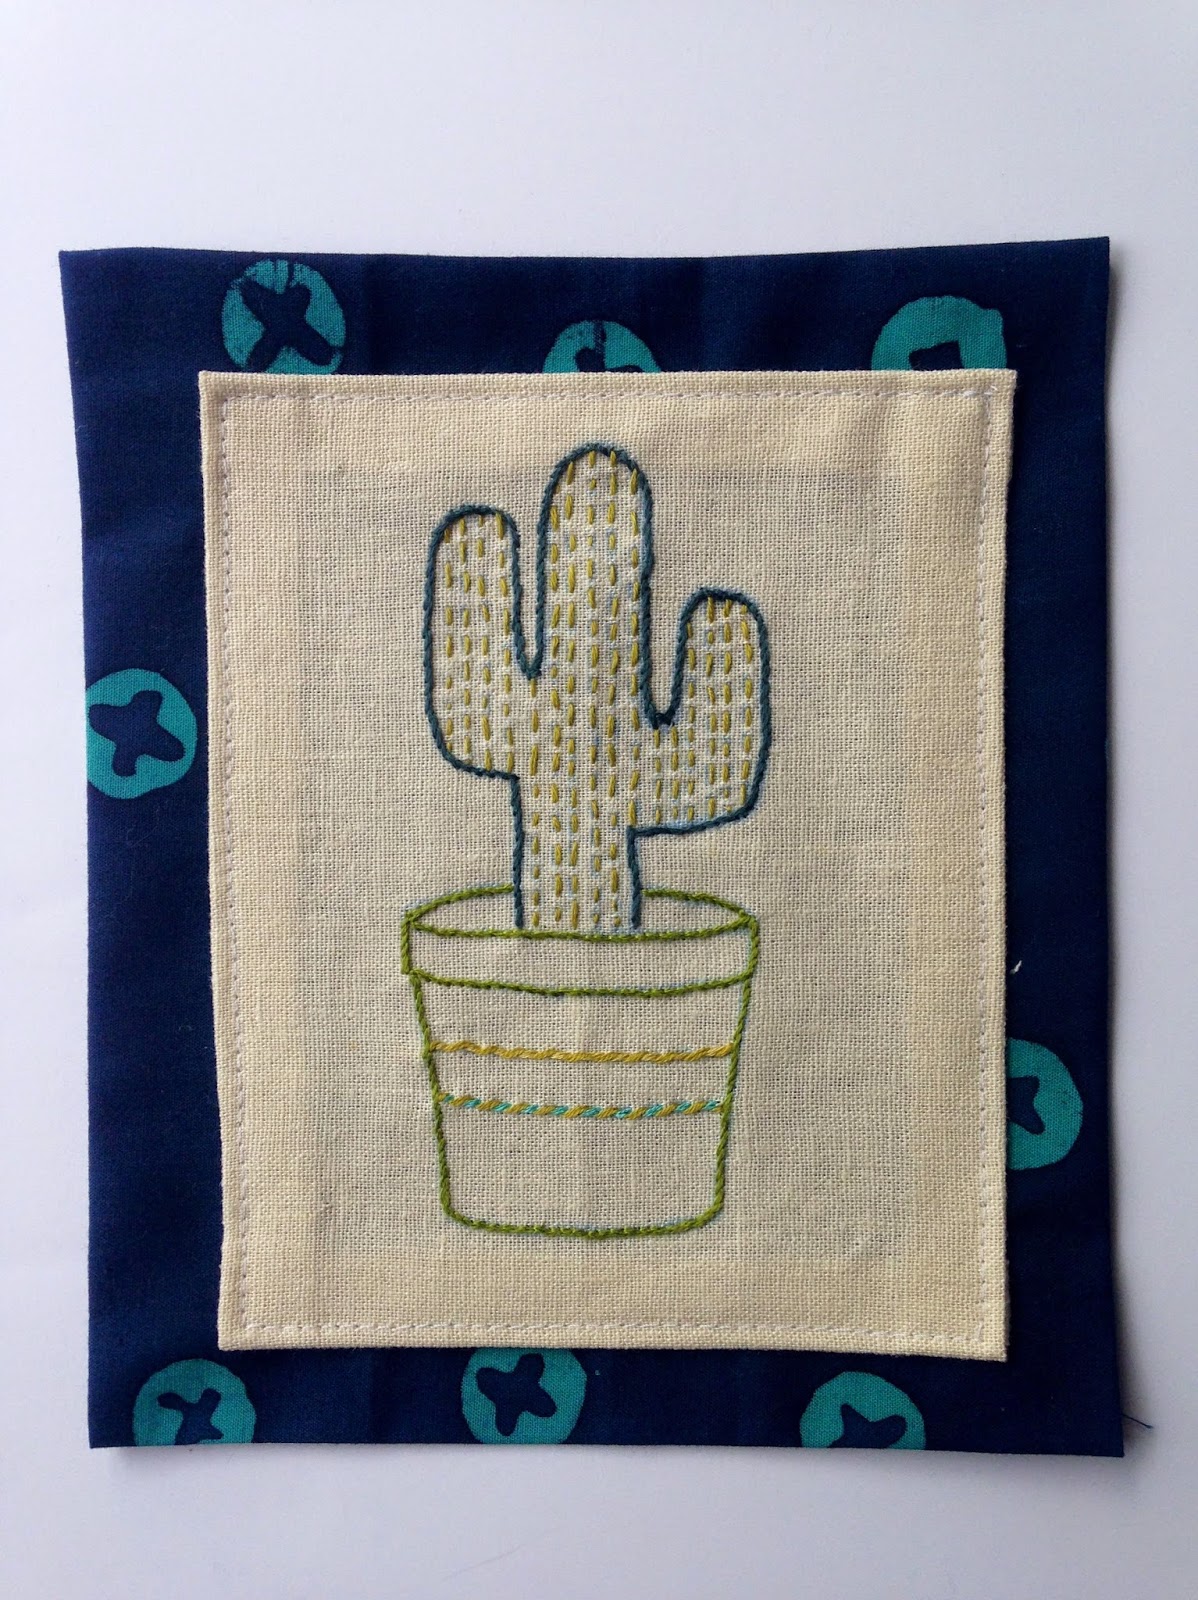 Download feeling stitchy: Thimblenest Thursdays: How to Display Small Embroidery Designs on Canvas